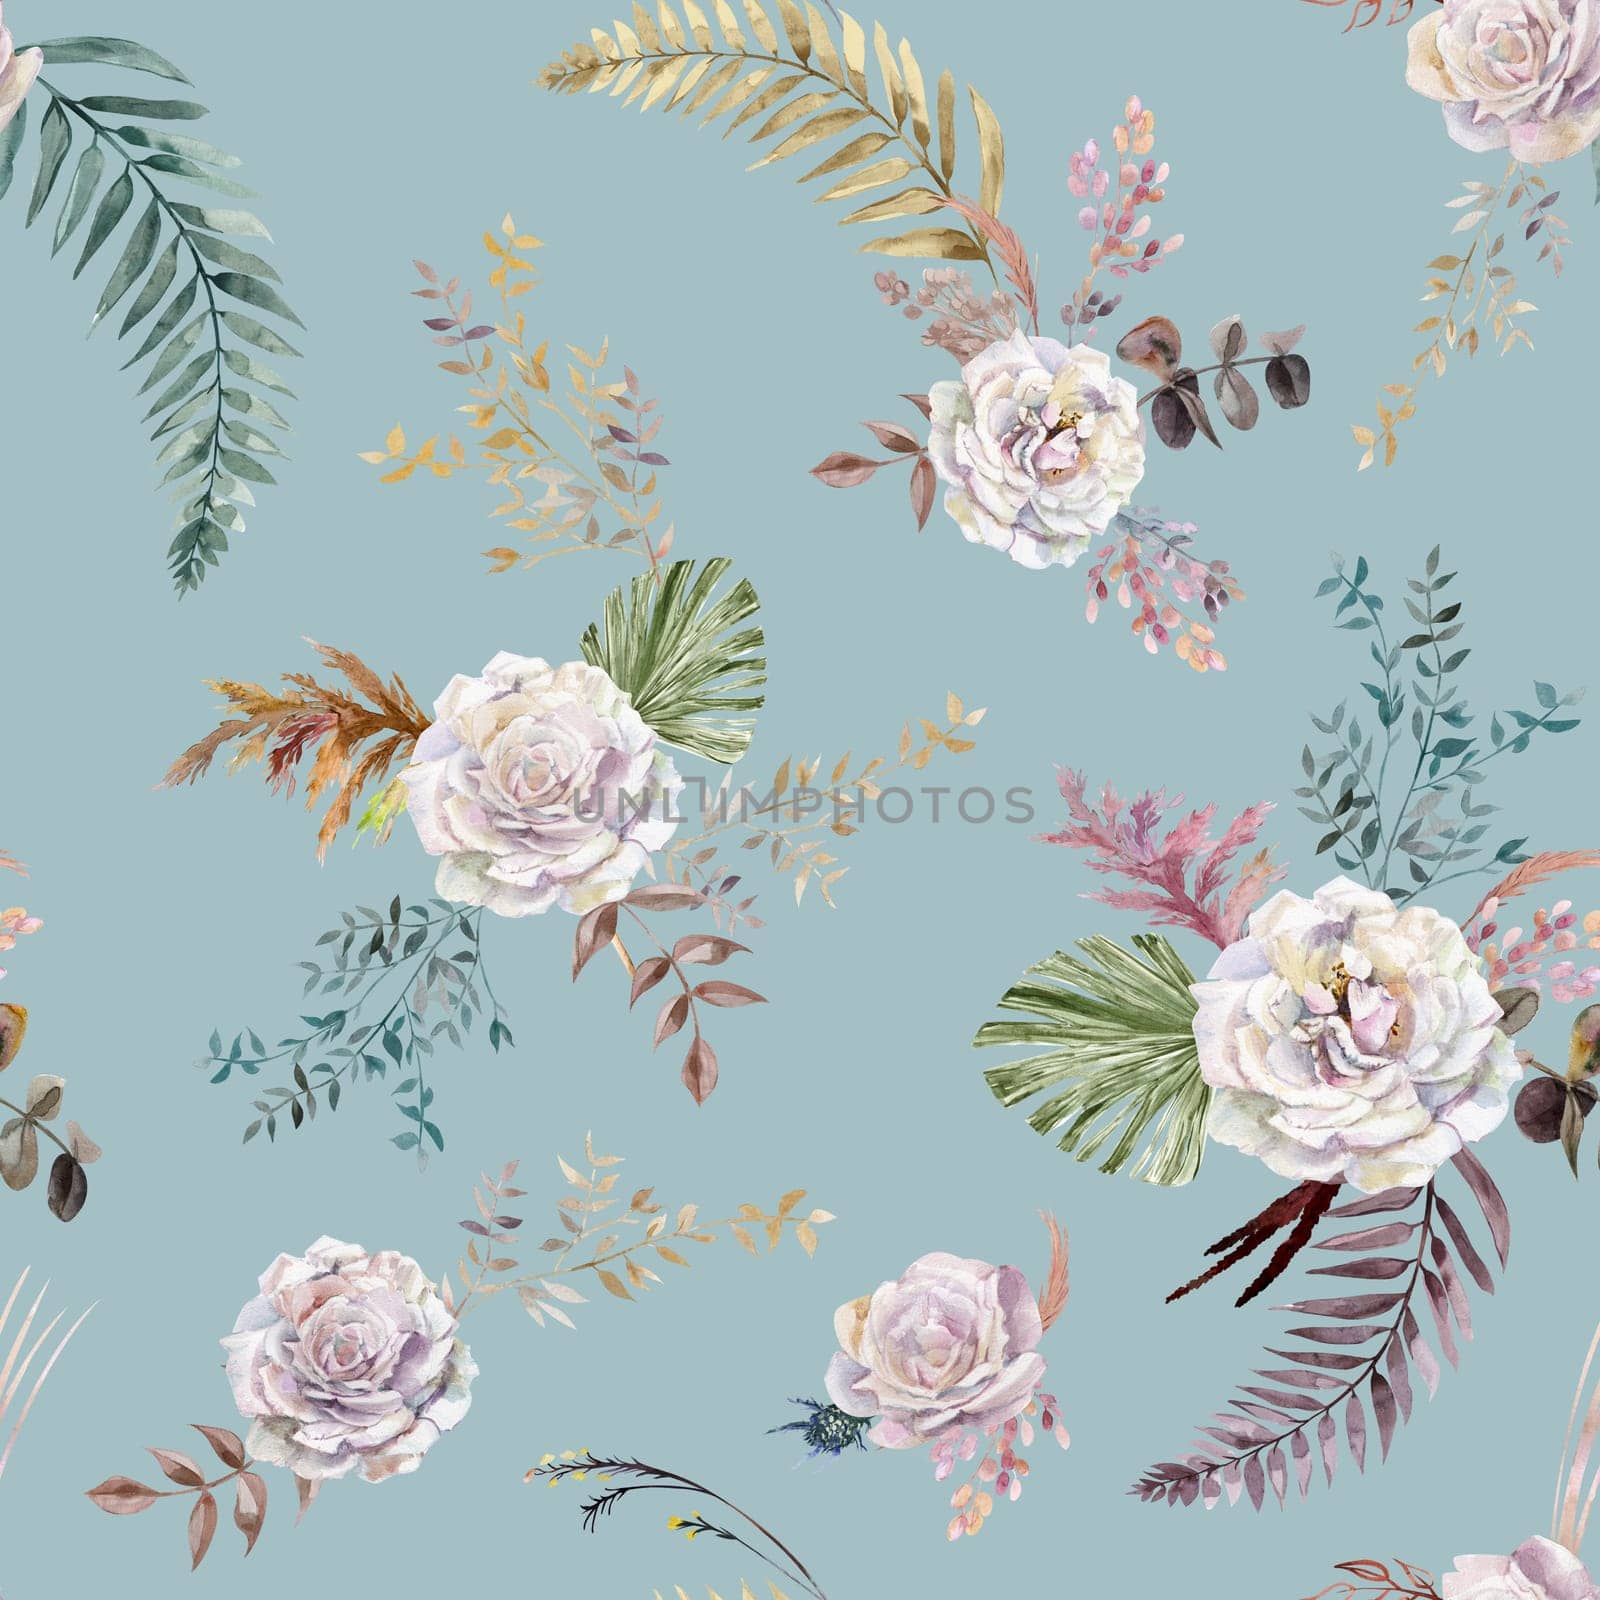 Watercolor vintage seamless pattern with flowers of white roses and tropical palm leaves for summer textiles